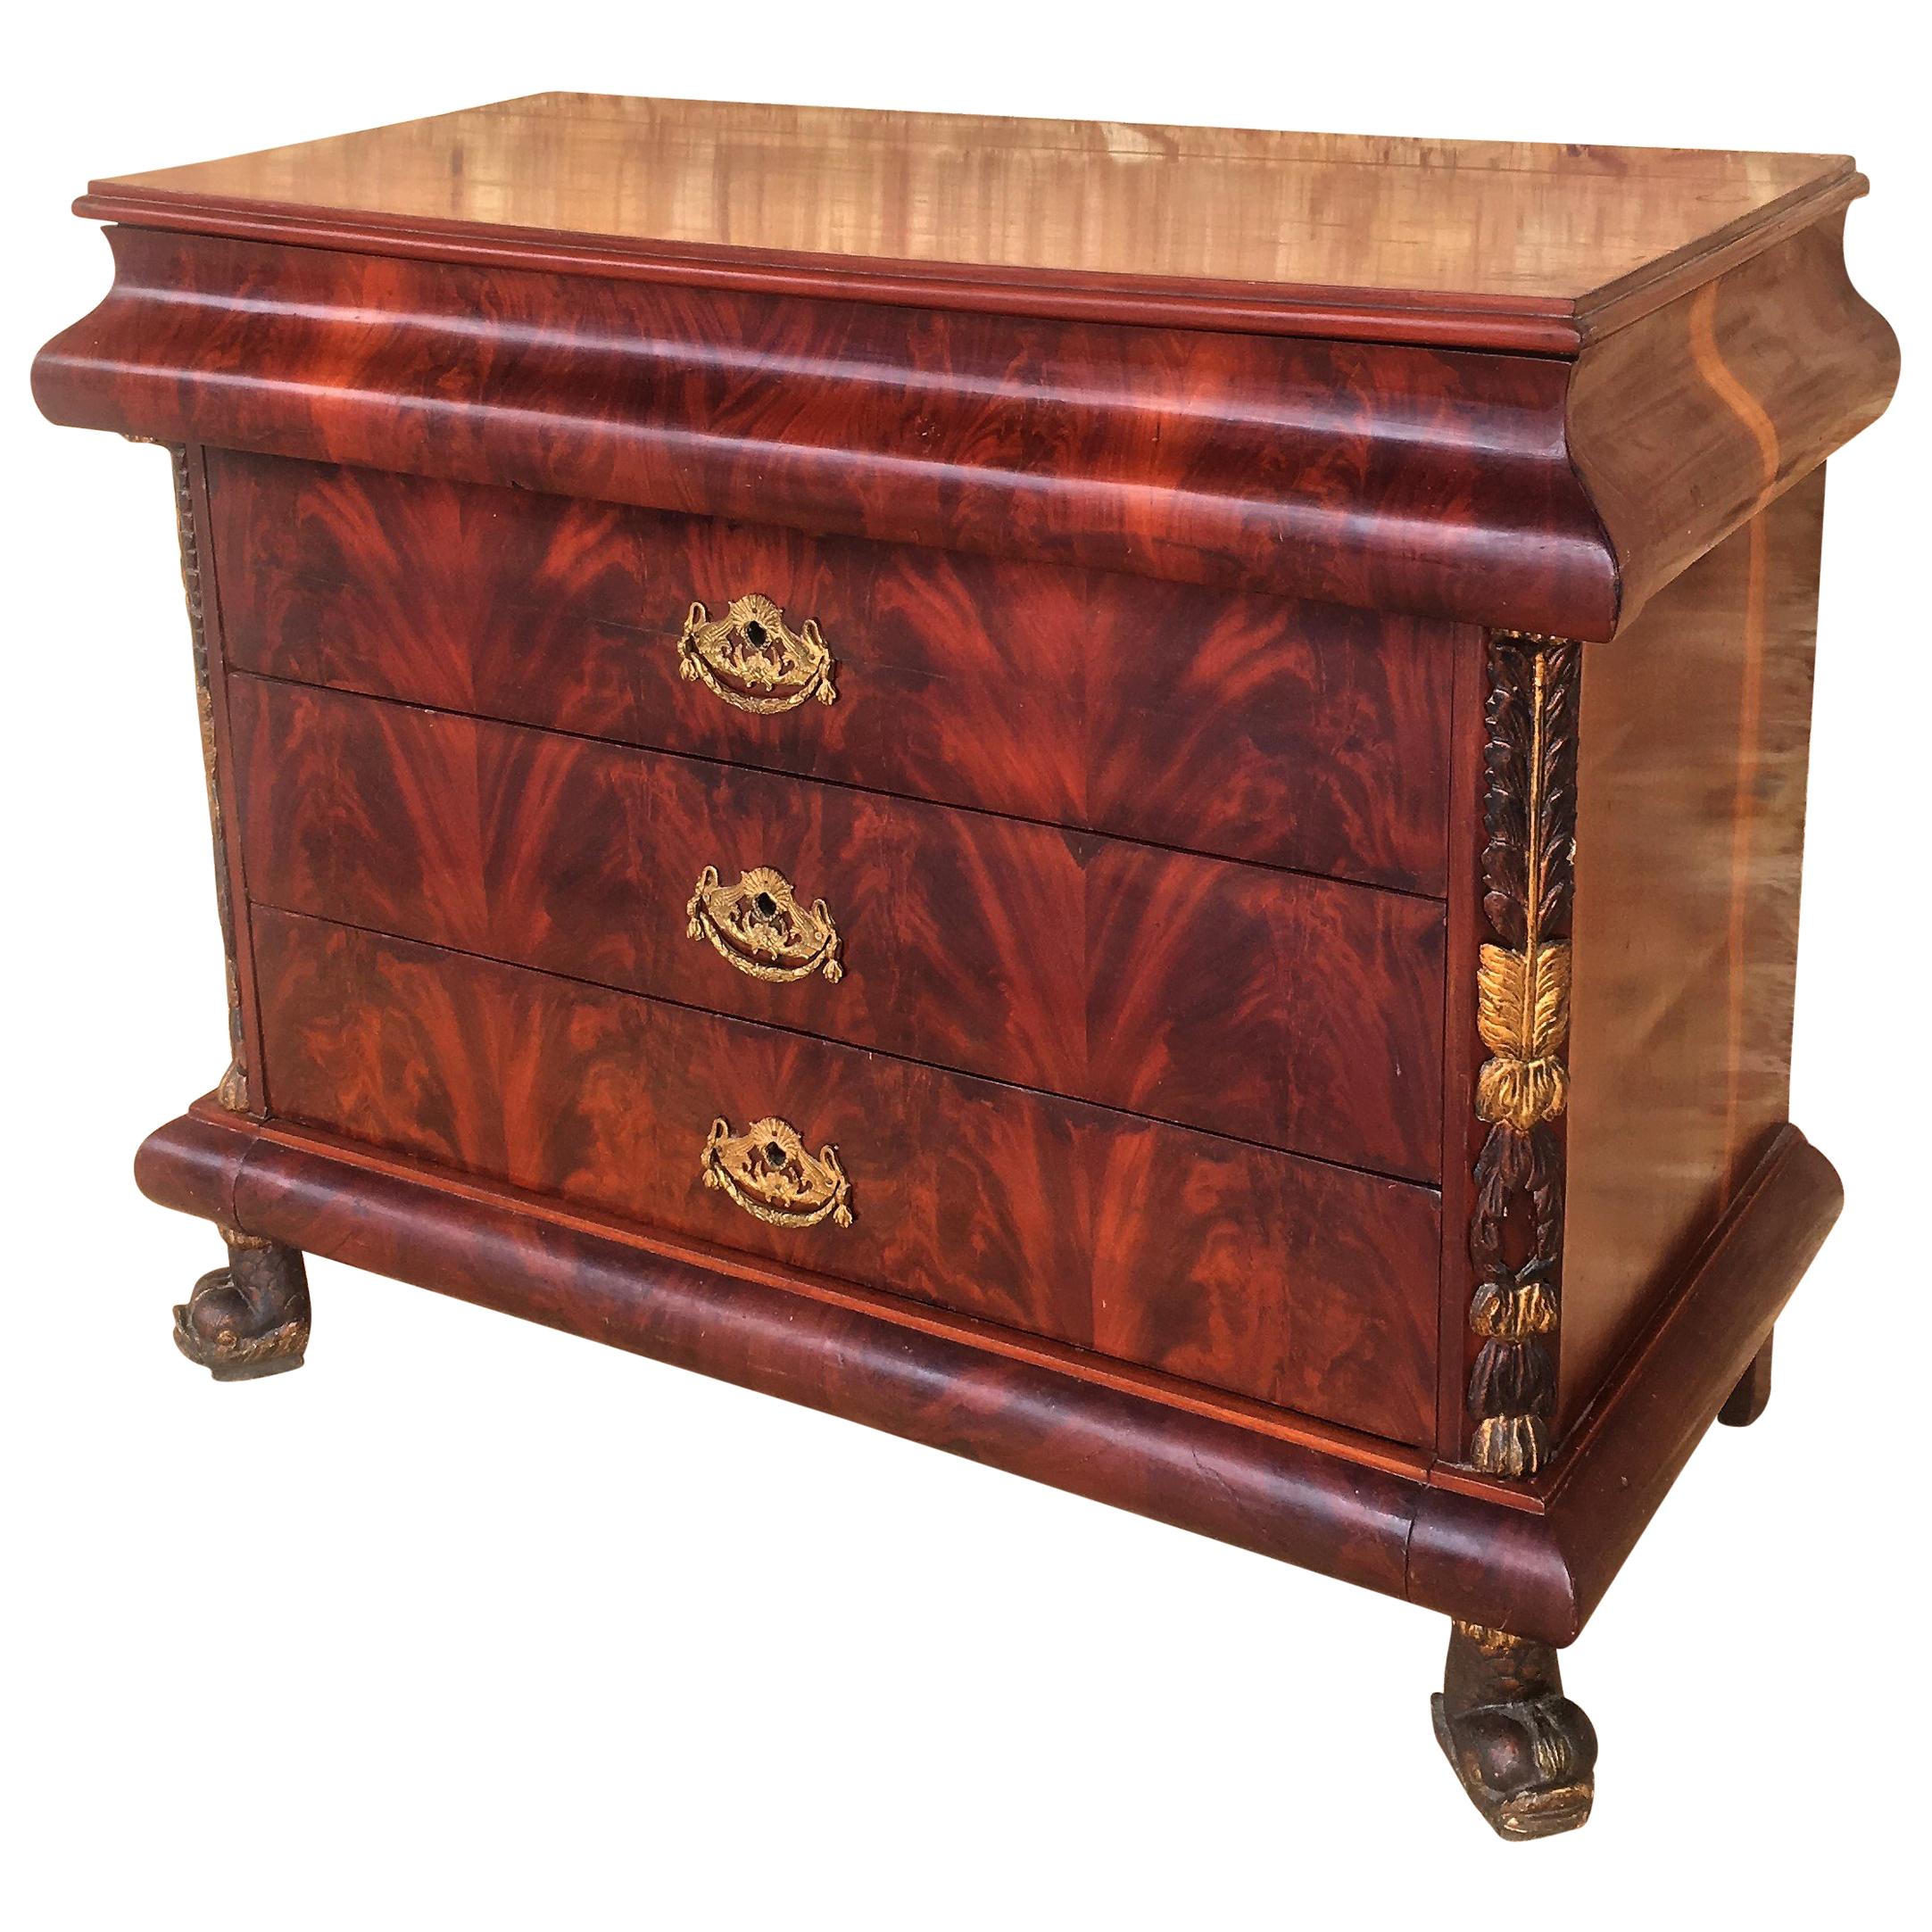 1830s French Empire Mahogany Chest with Four Drawers and Gilded Edges, Commode For Sale